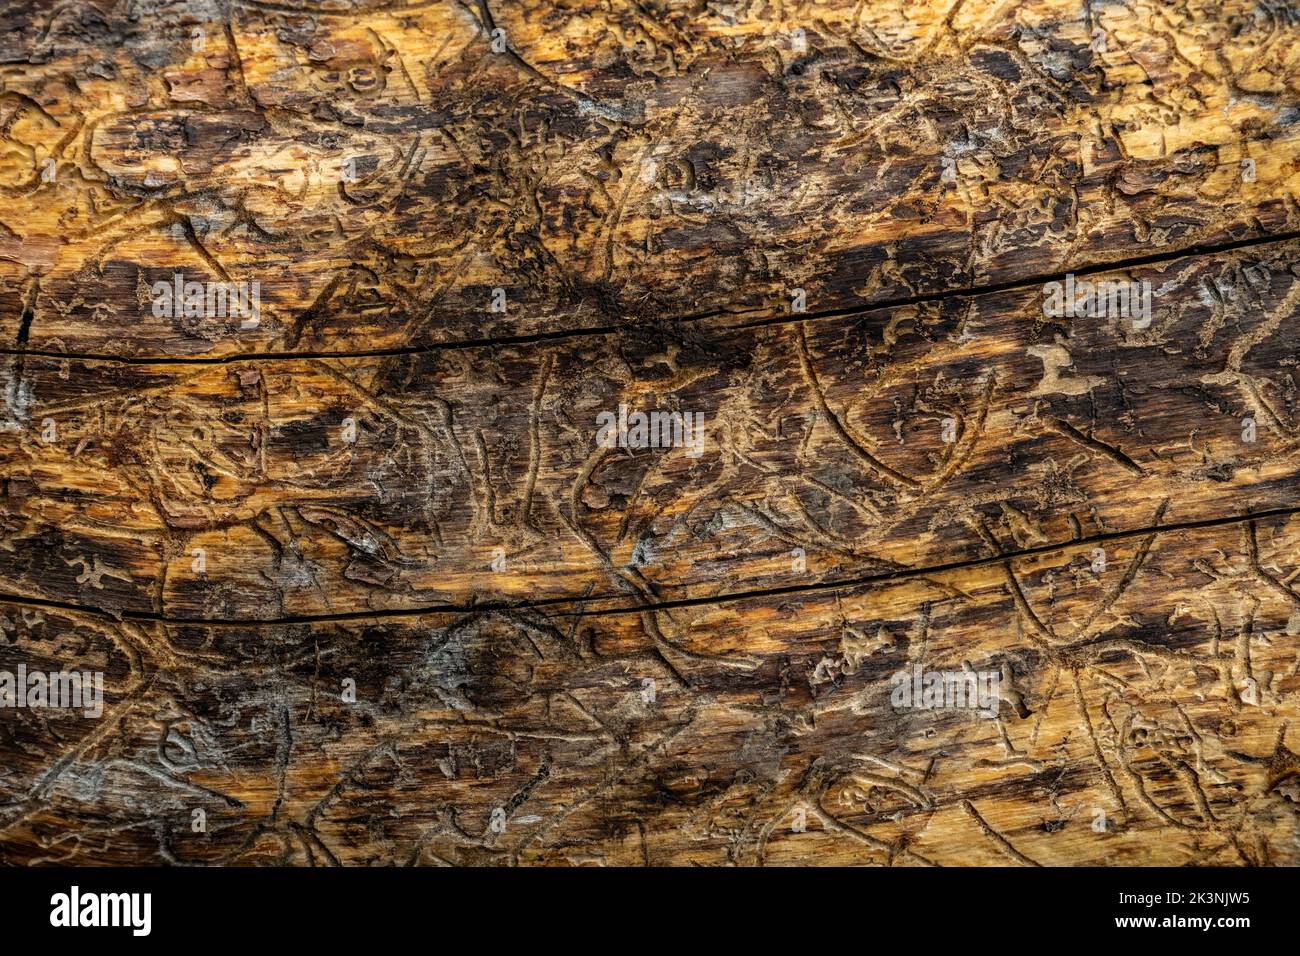 Texture of Insect Trails In Fallen Log in Yellowstone National Park Stock Photo